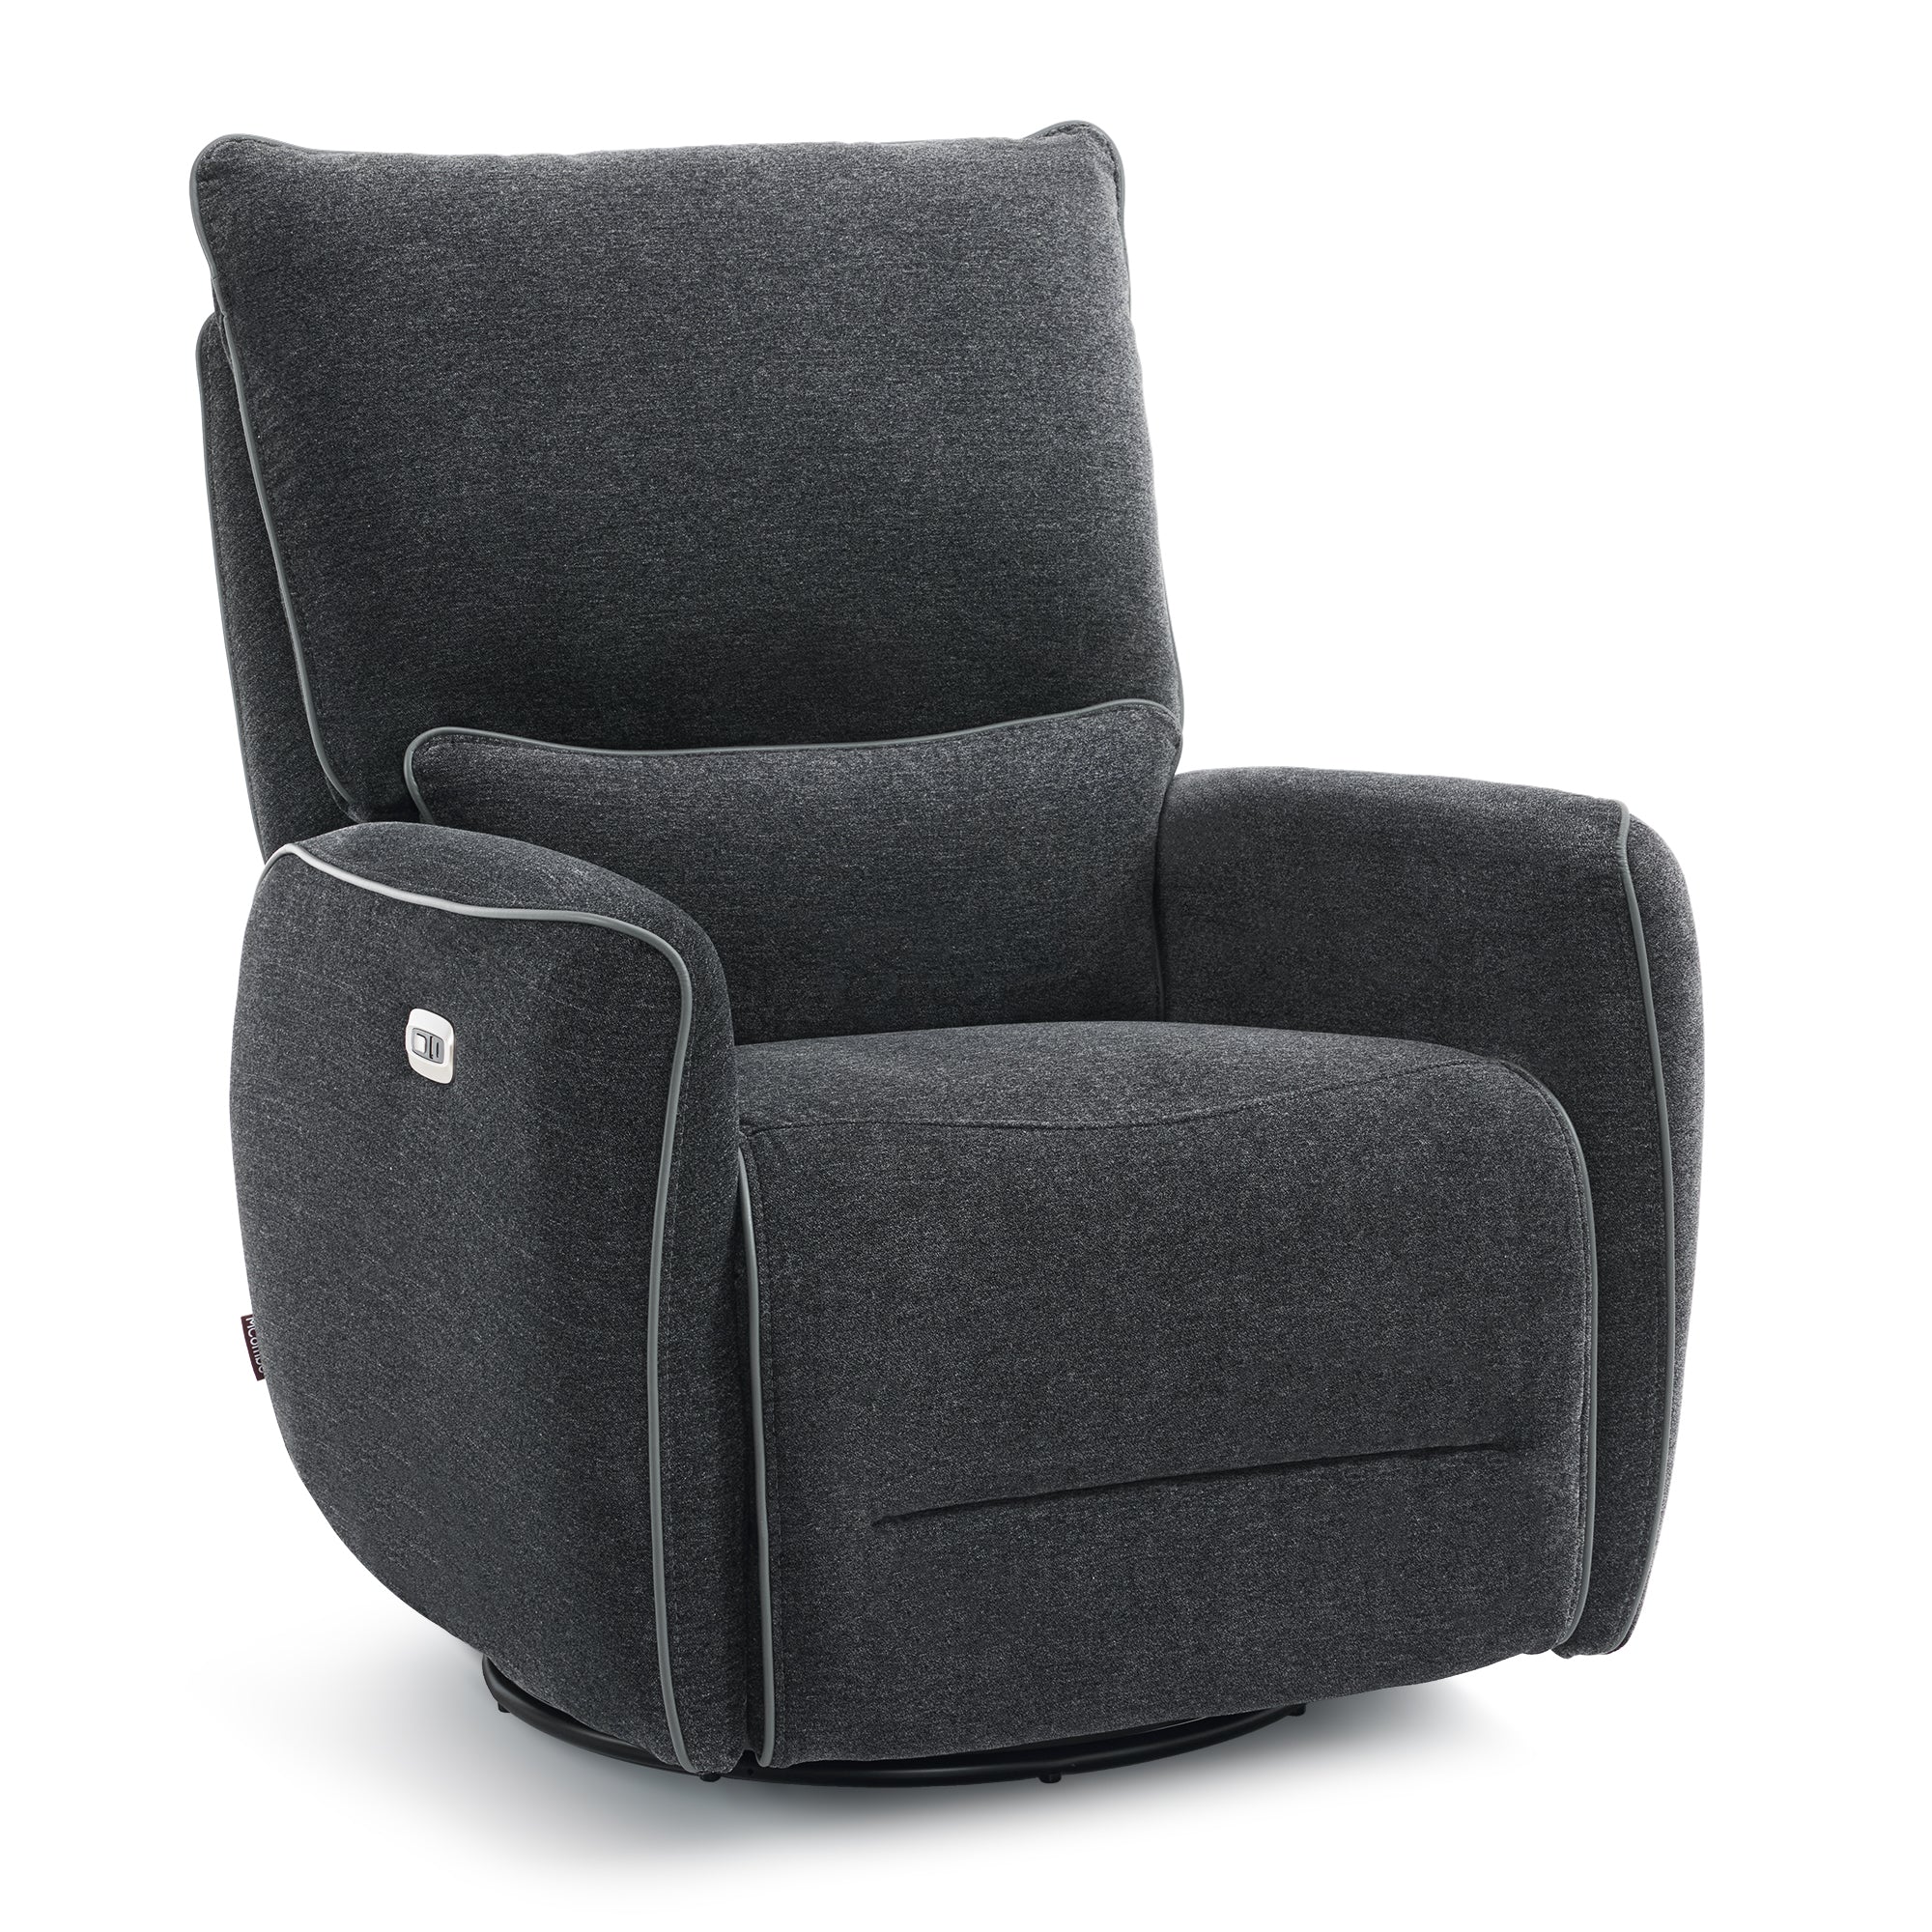 MCombo Power Swivel Glider Recliner Chair, Electric Rocker Recliner Chairs with USB Charging Ports for Living Room and Nursery, Fabric 6160-6922